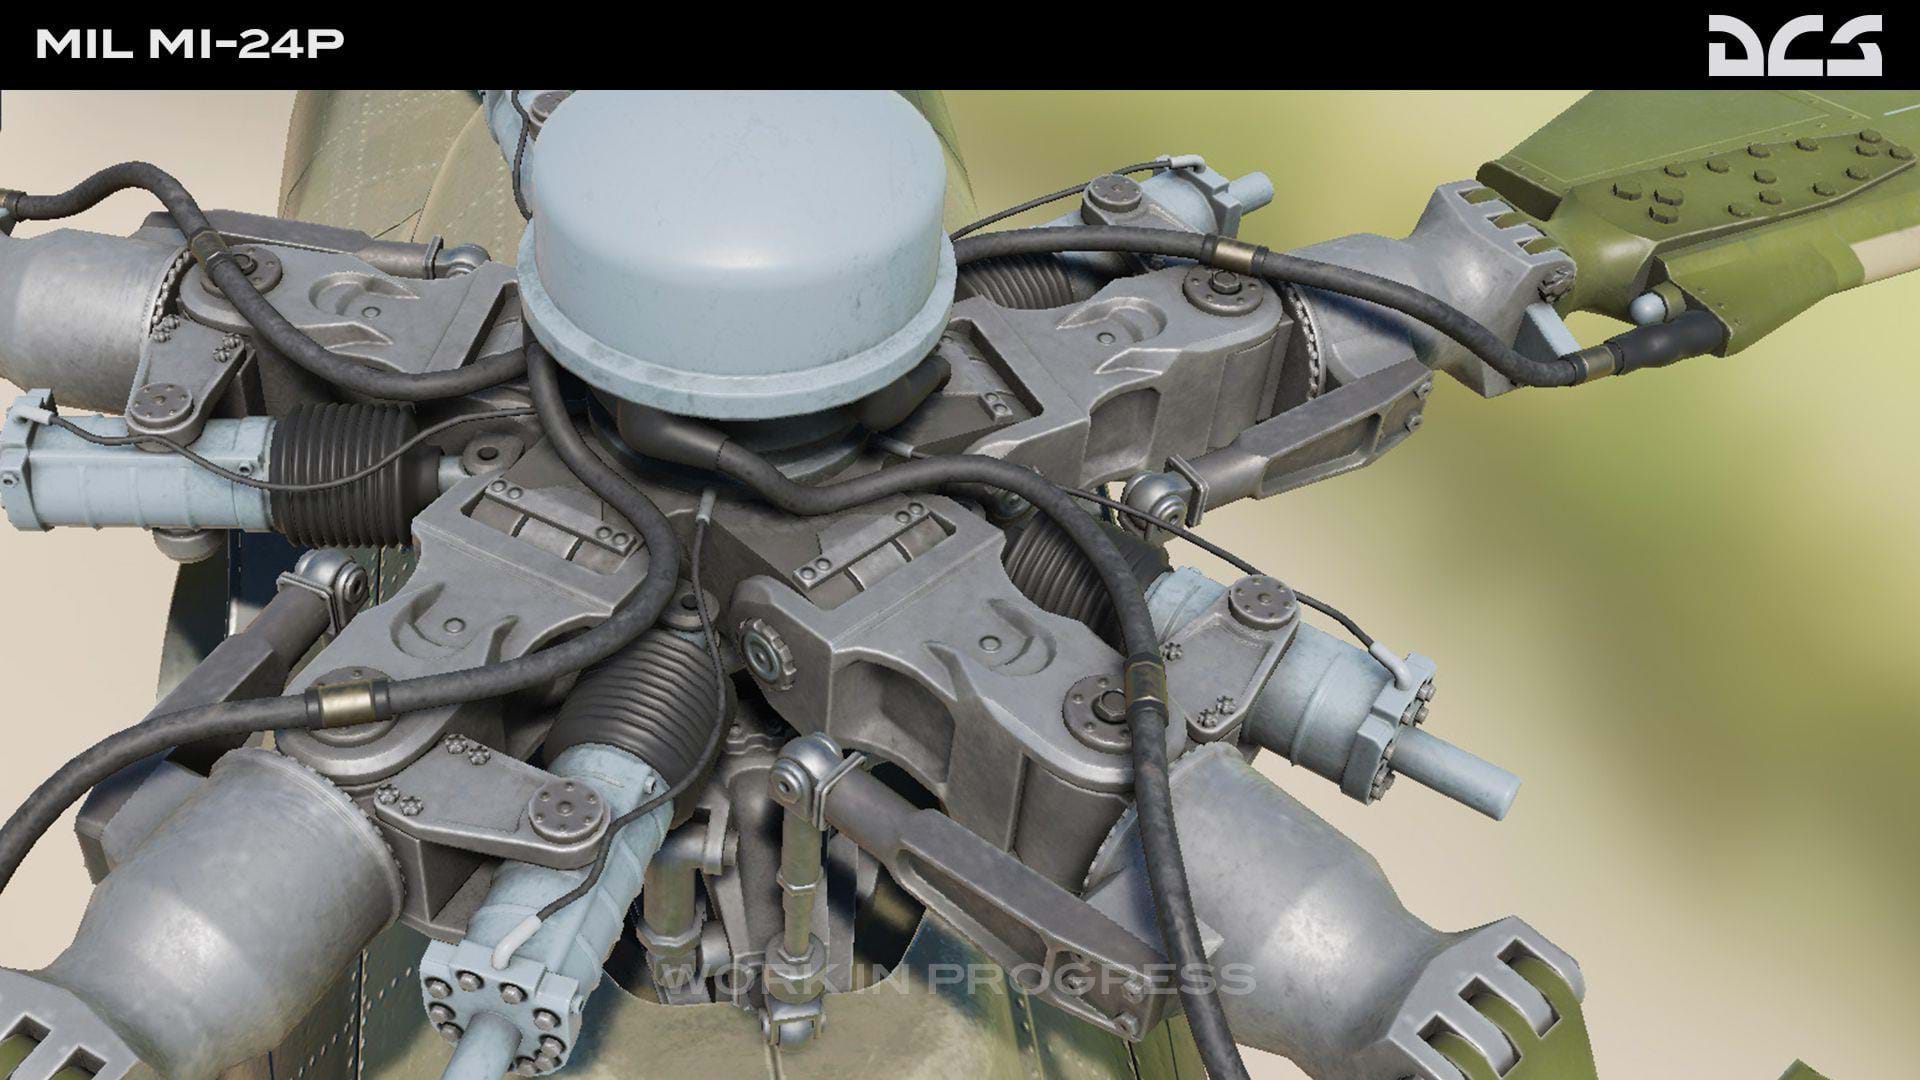 Eagle Dynamics releases new screenshots and development report on the Mi-24 for DCS